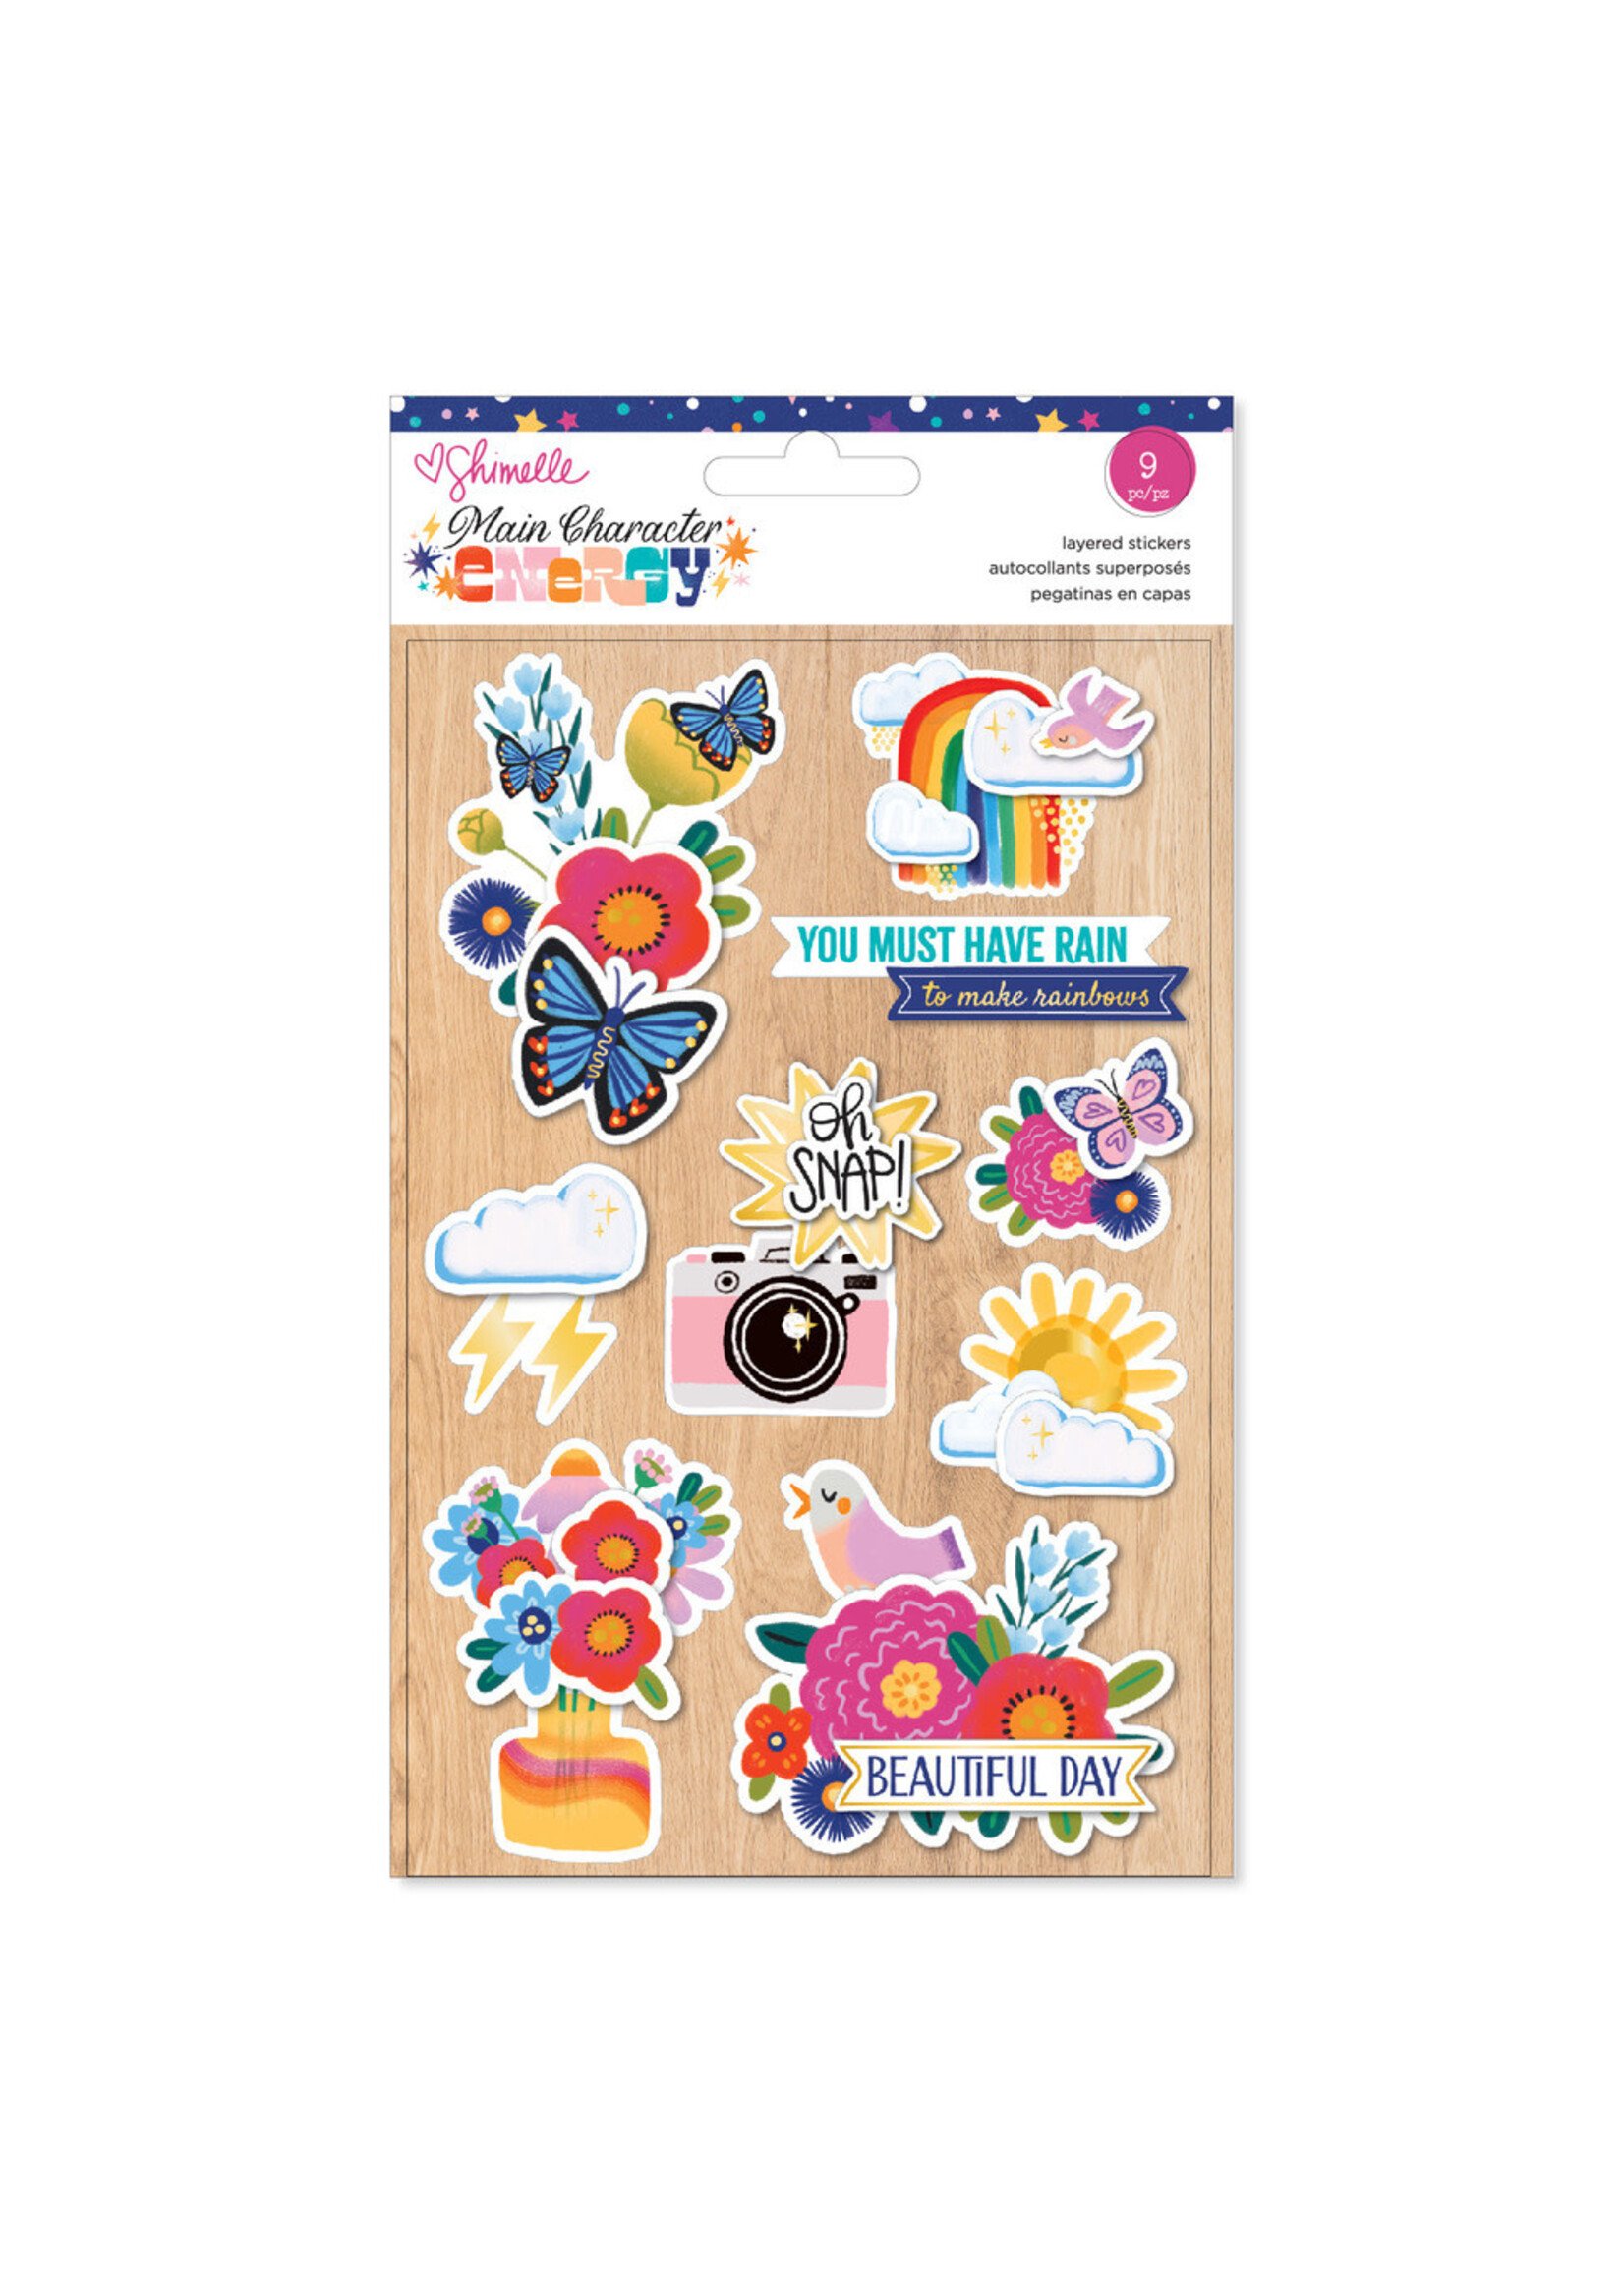 American Crafts Layered Stickers, Main Character Energy